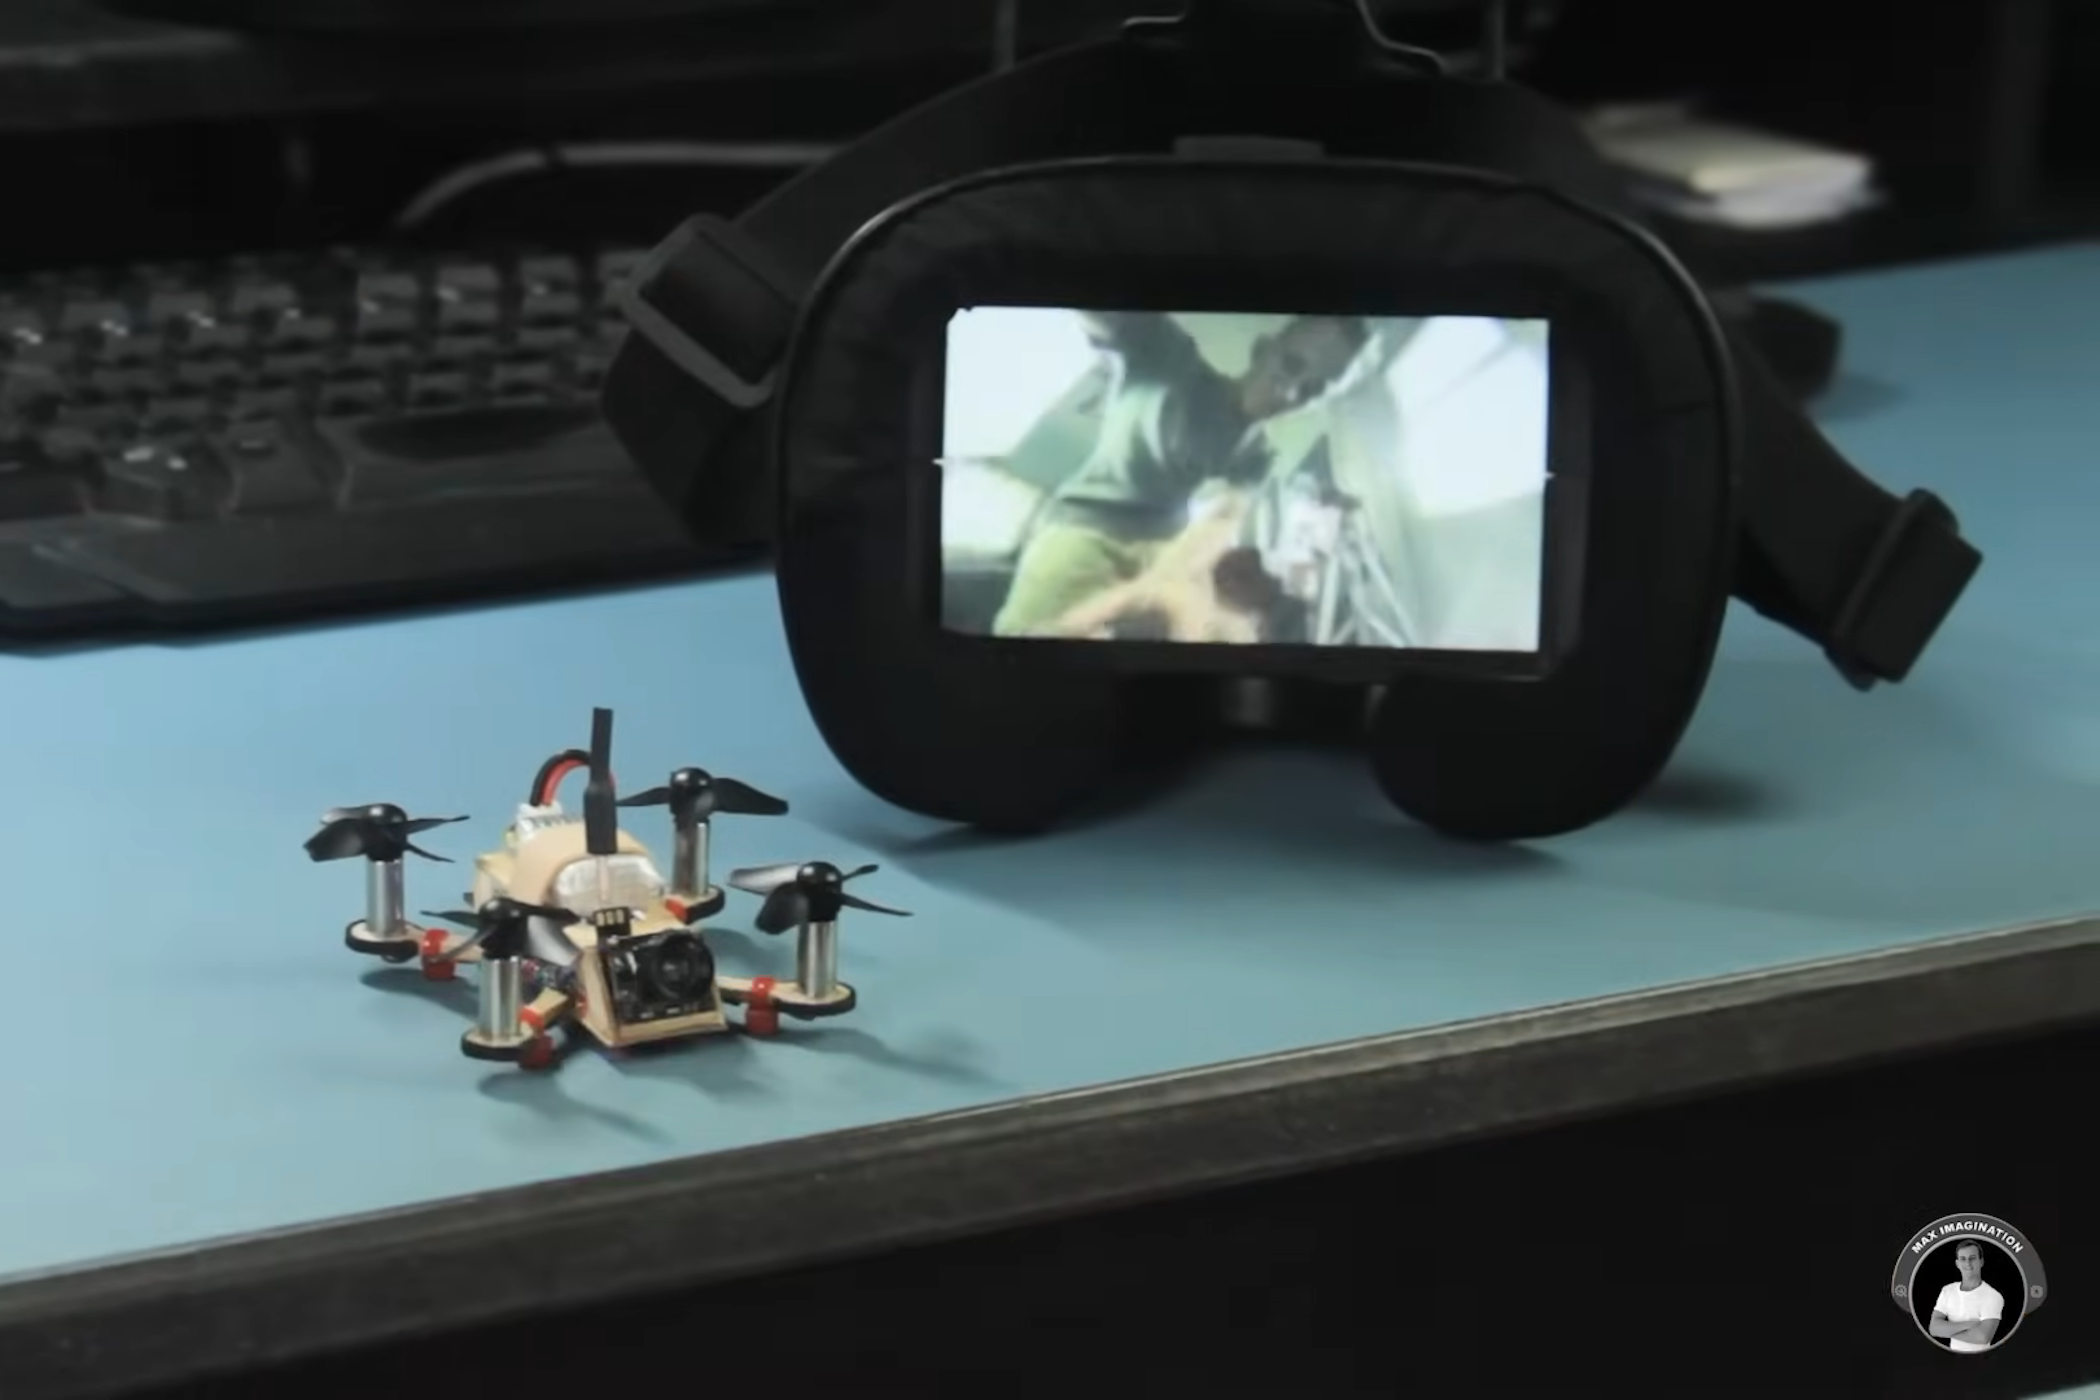 Someone made their own drone with an Arduino Pro Mini, complete with its own tiny camera